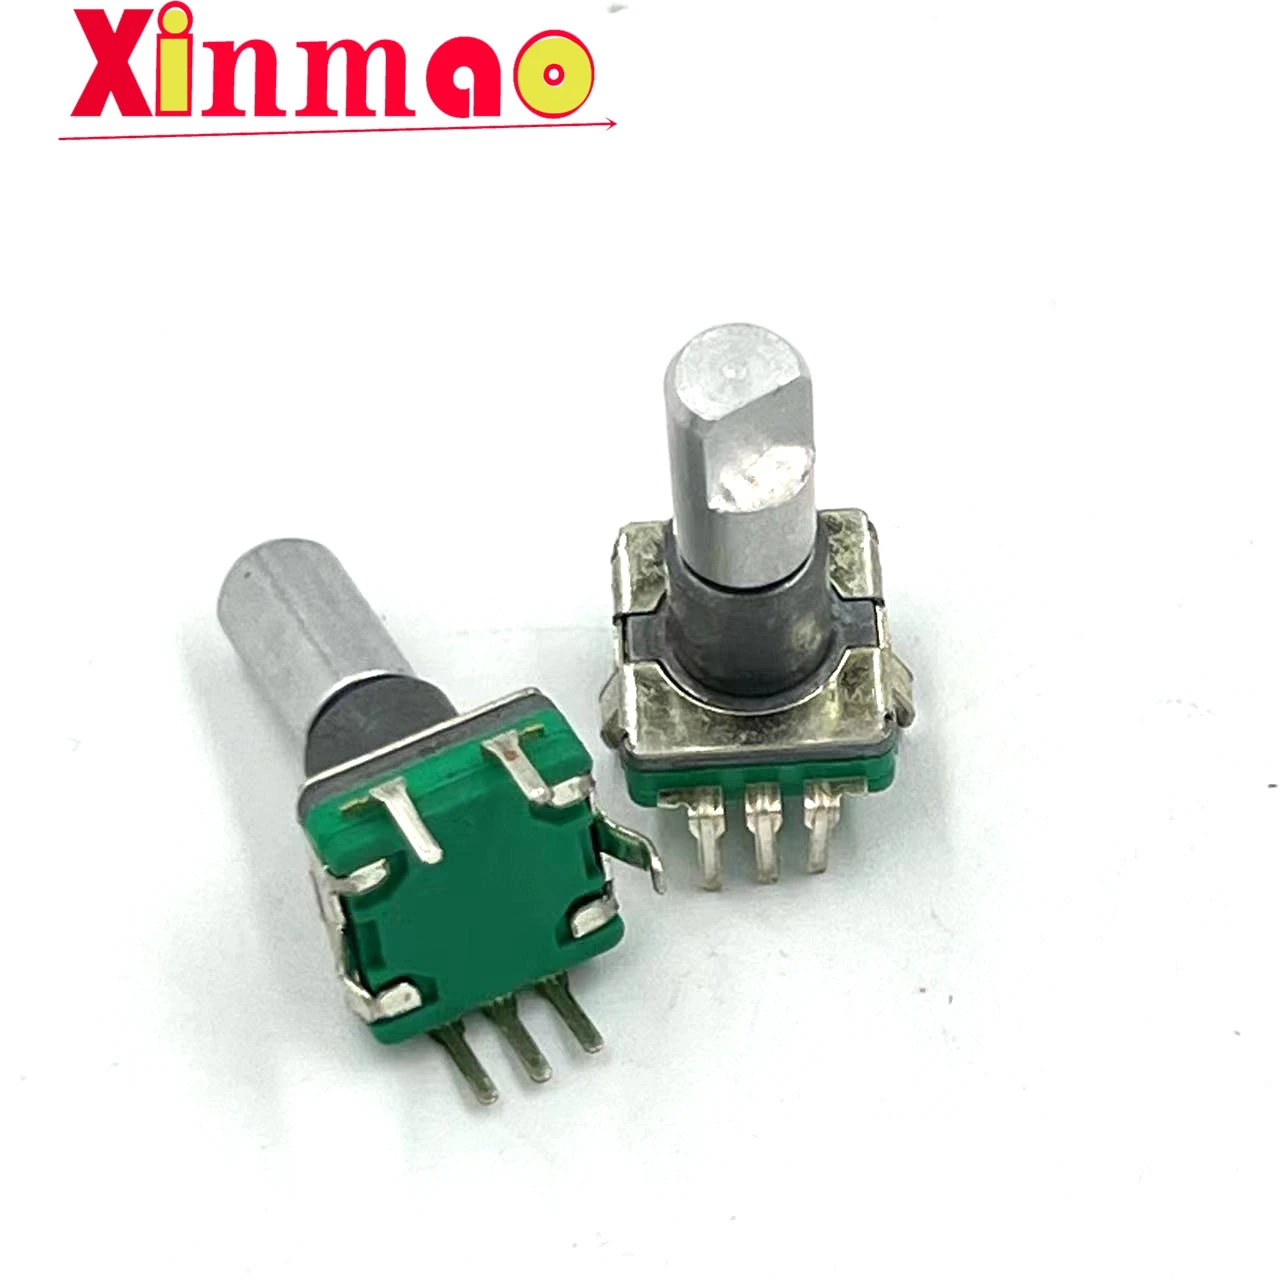 Ljv encoder with switch ec11 type 30 positioning number 15 pulse point shaft length 18mm vehicle mounted DV potentiometer